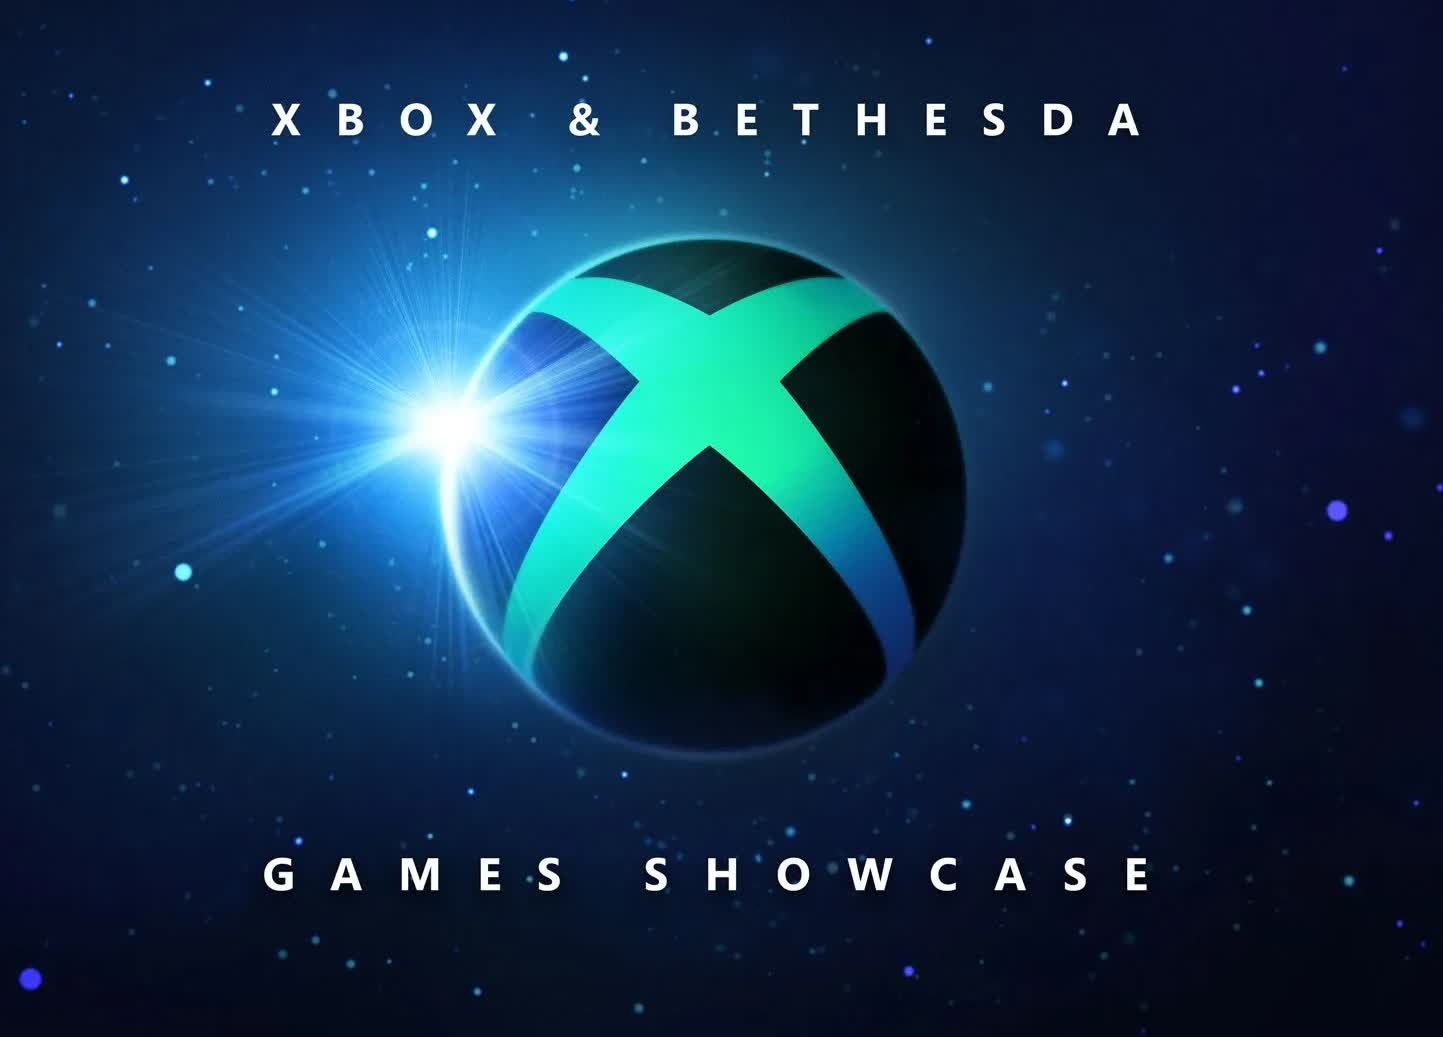 Bethesda and Xbox will host a games showcase on June 12